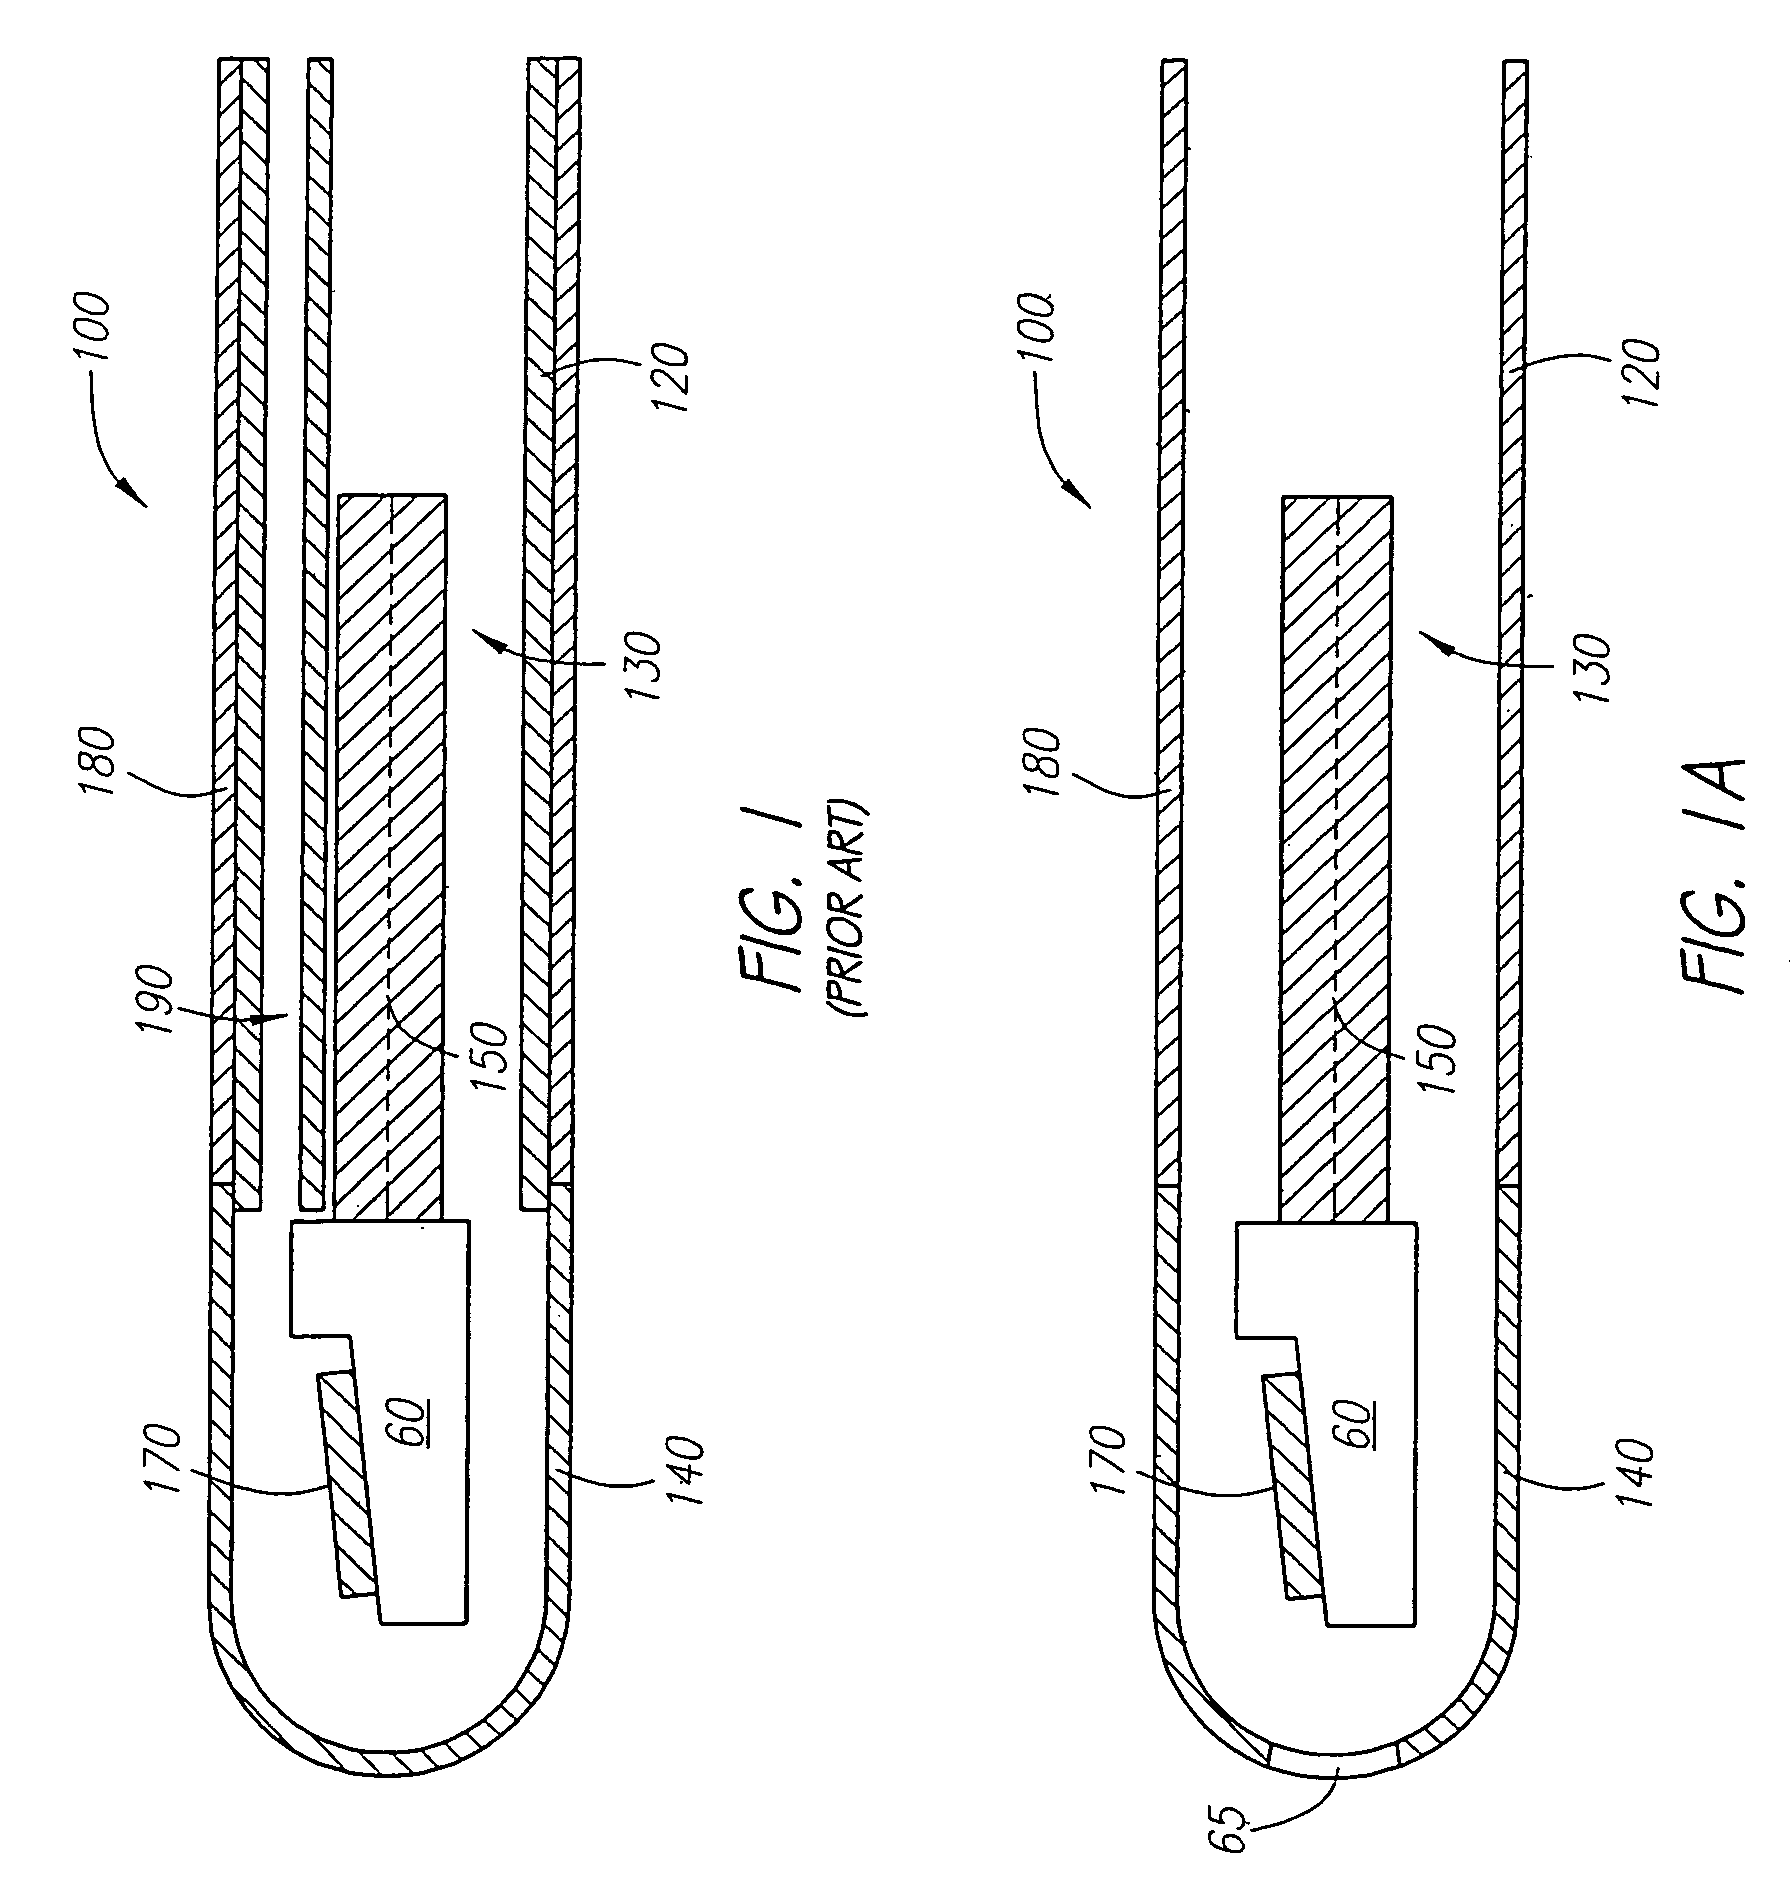 Method of mounting a transducer to a driveshaft